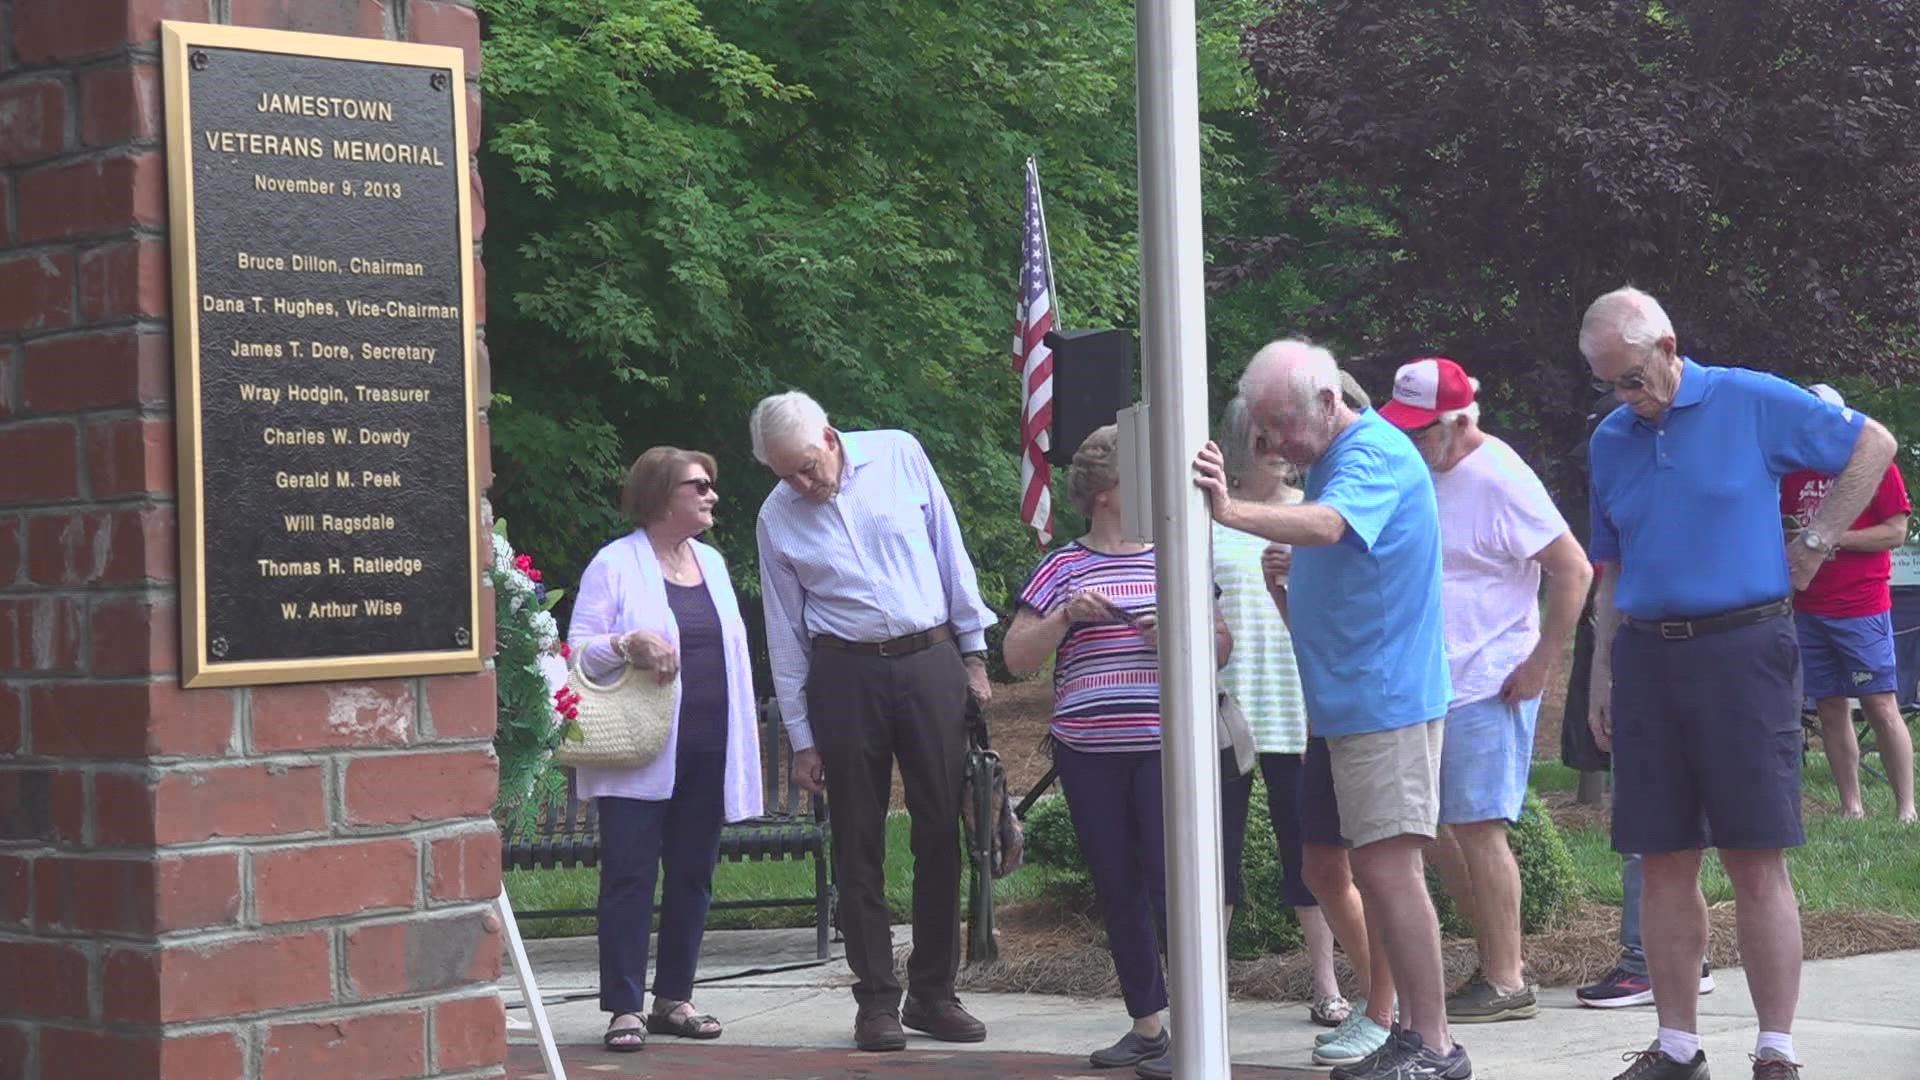 The Jamestown Veterans’ Committee hosted the town’s Memorial Day ceremony this year.